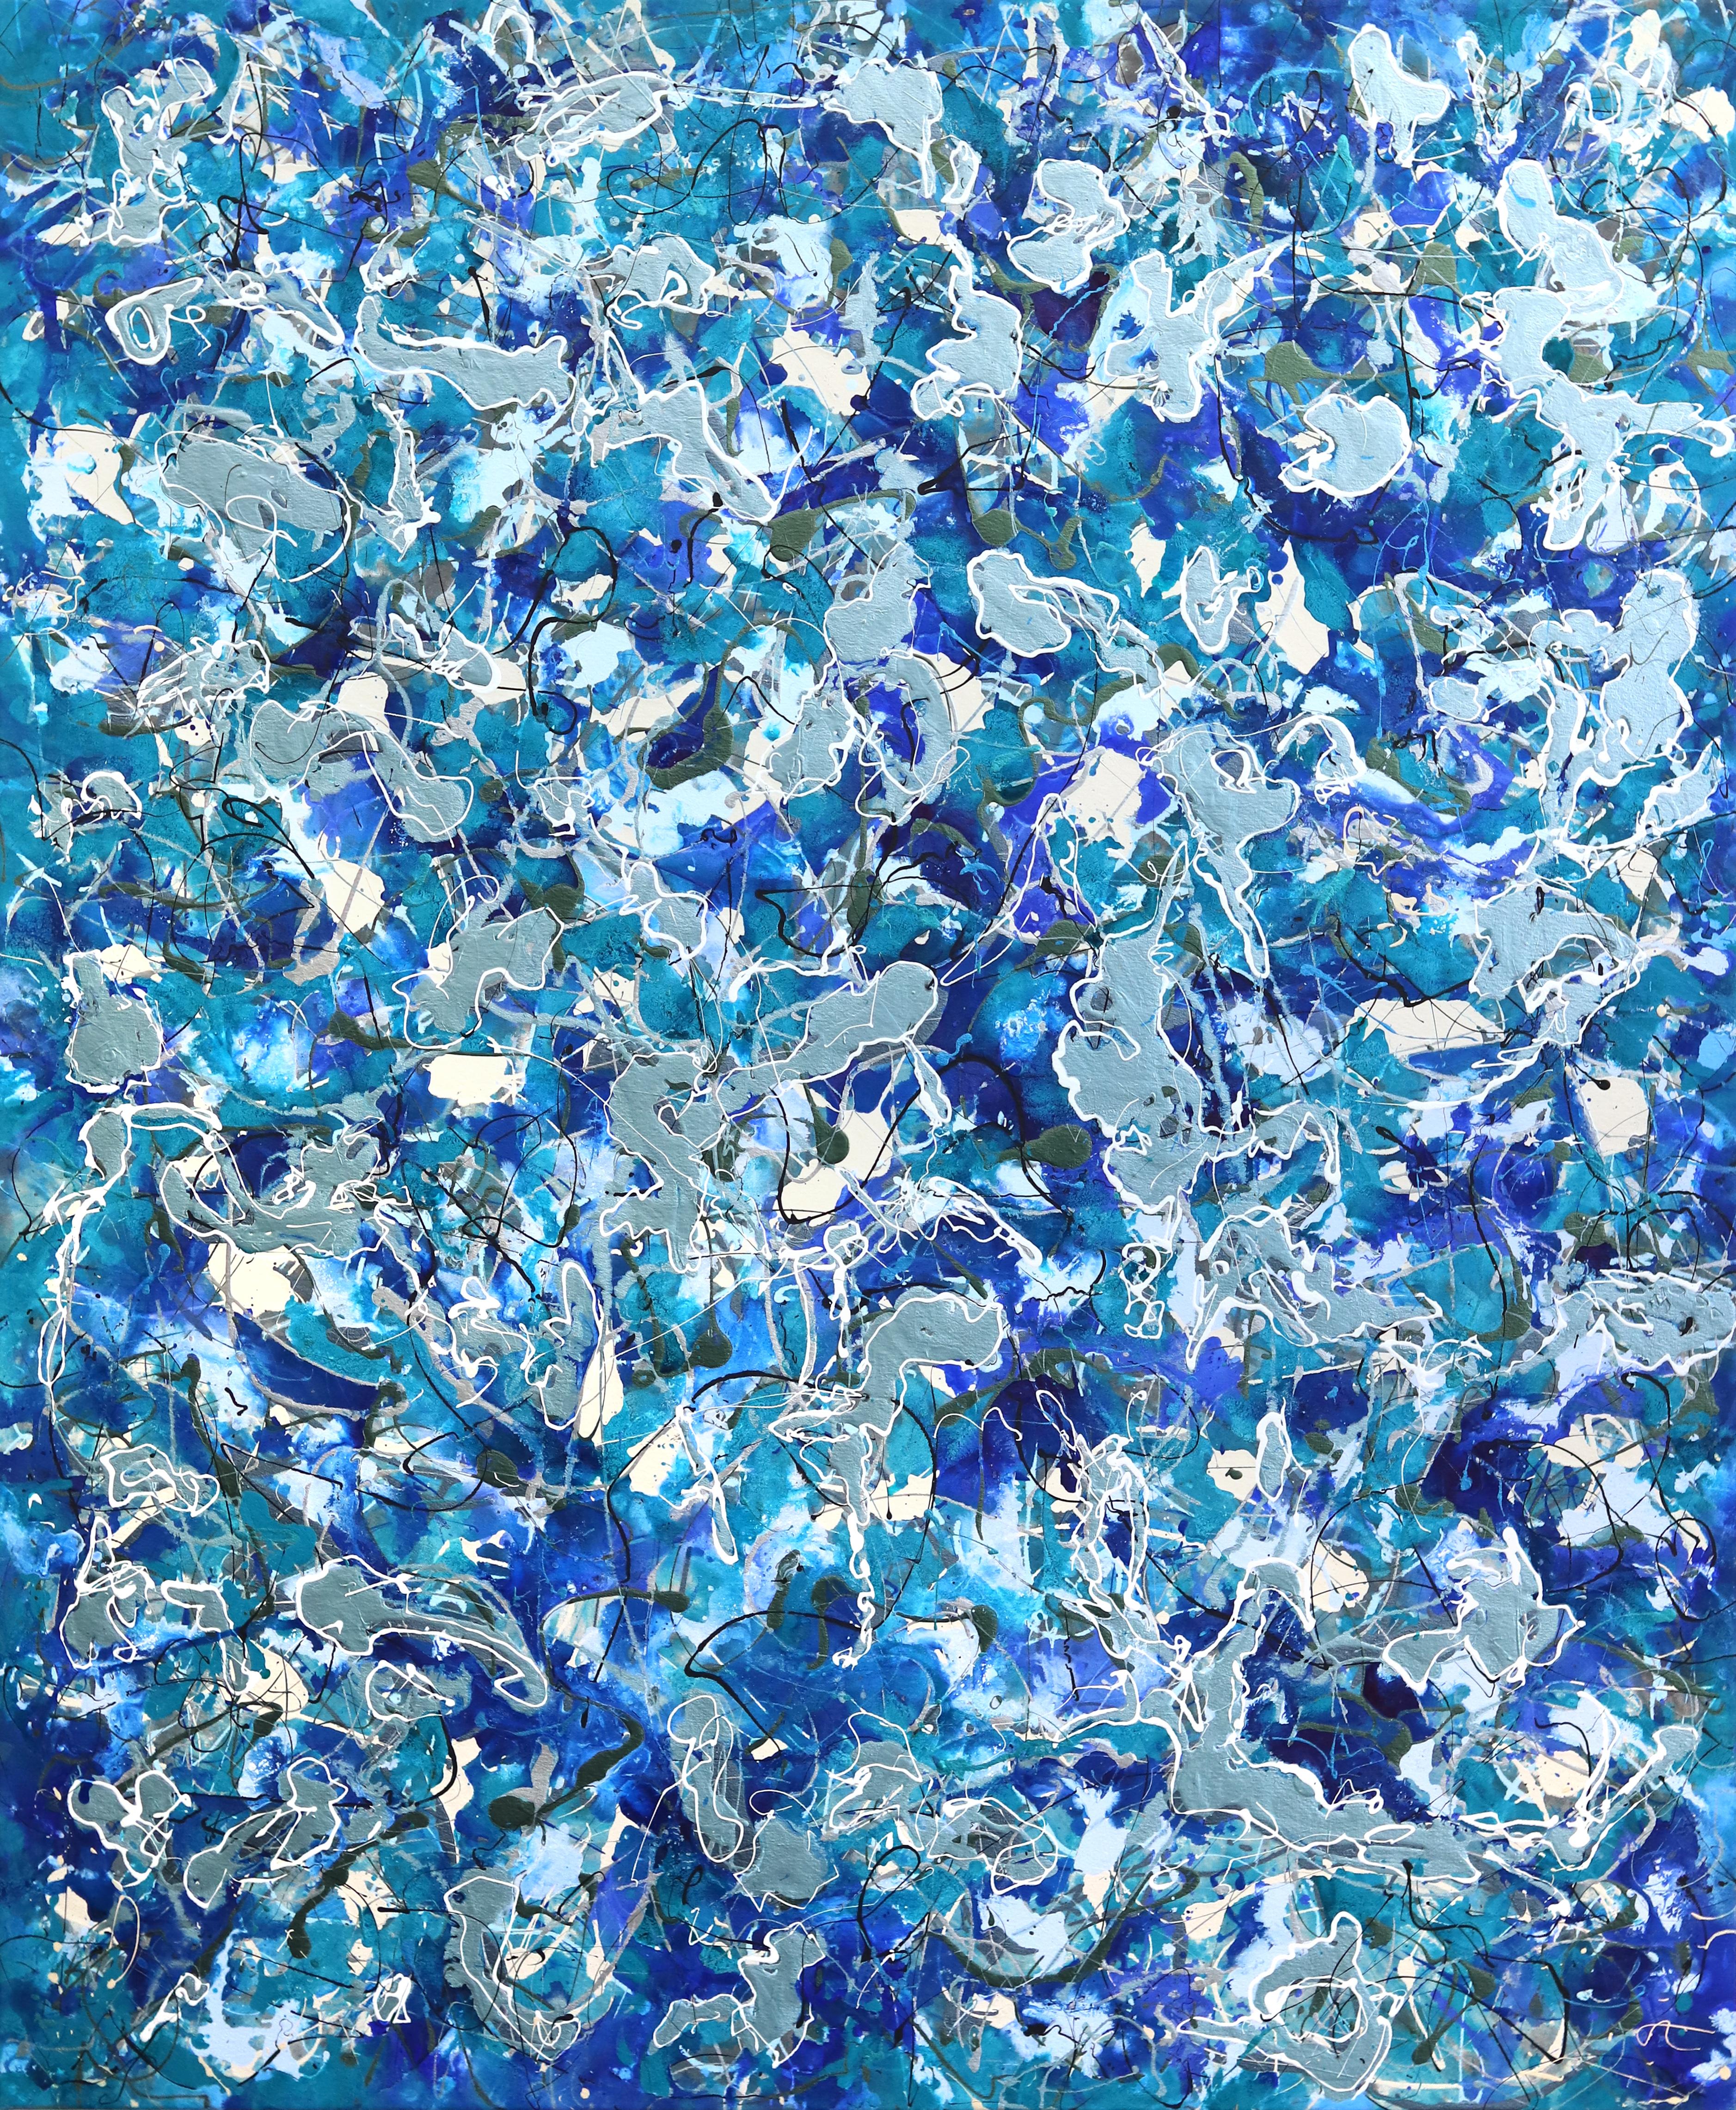 Blue Serenity - Abstract Blue Expressionist Original Textural Action Painting